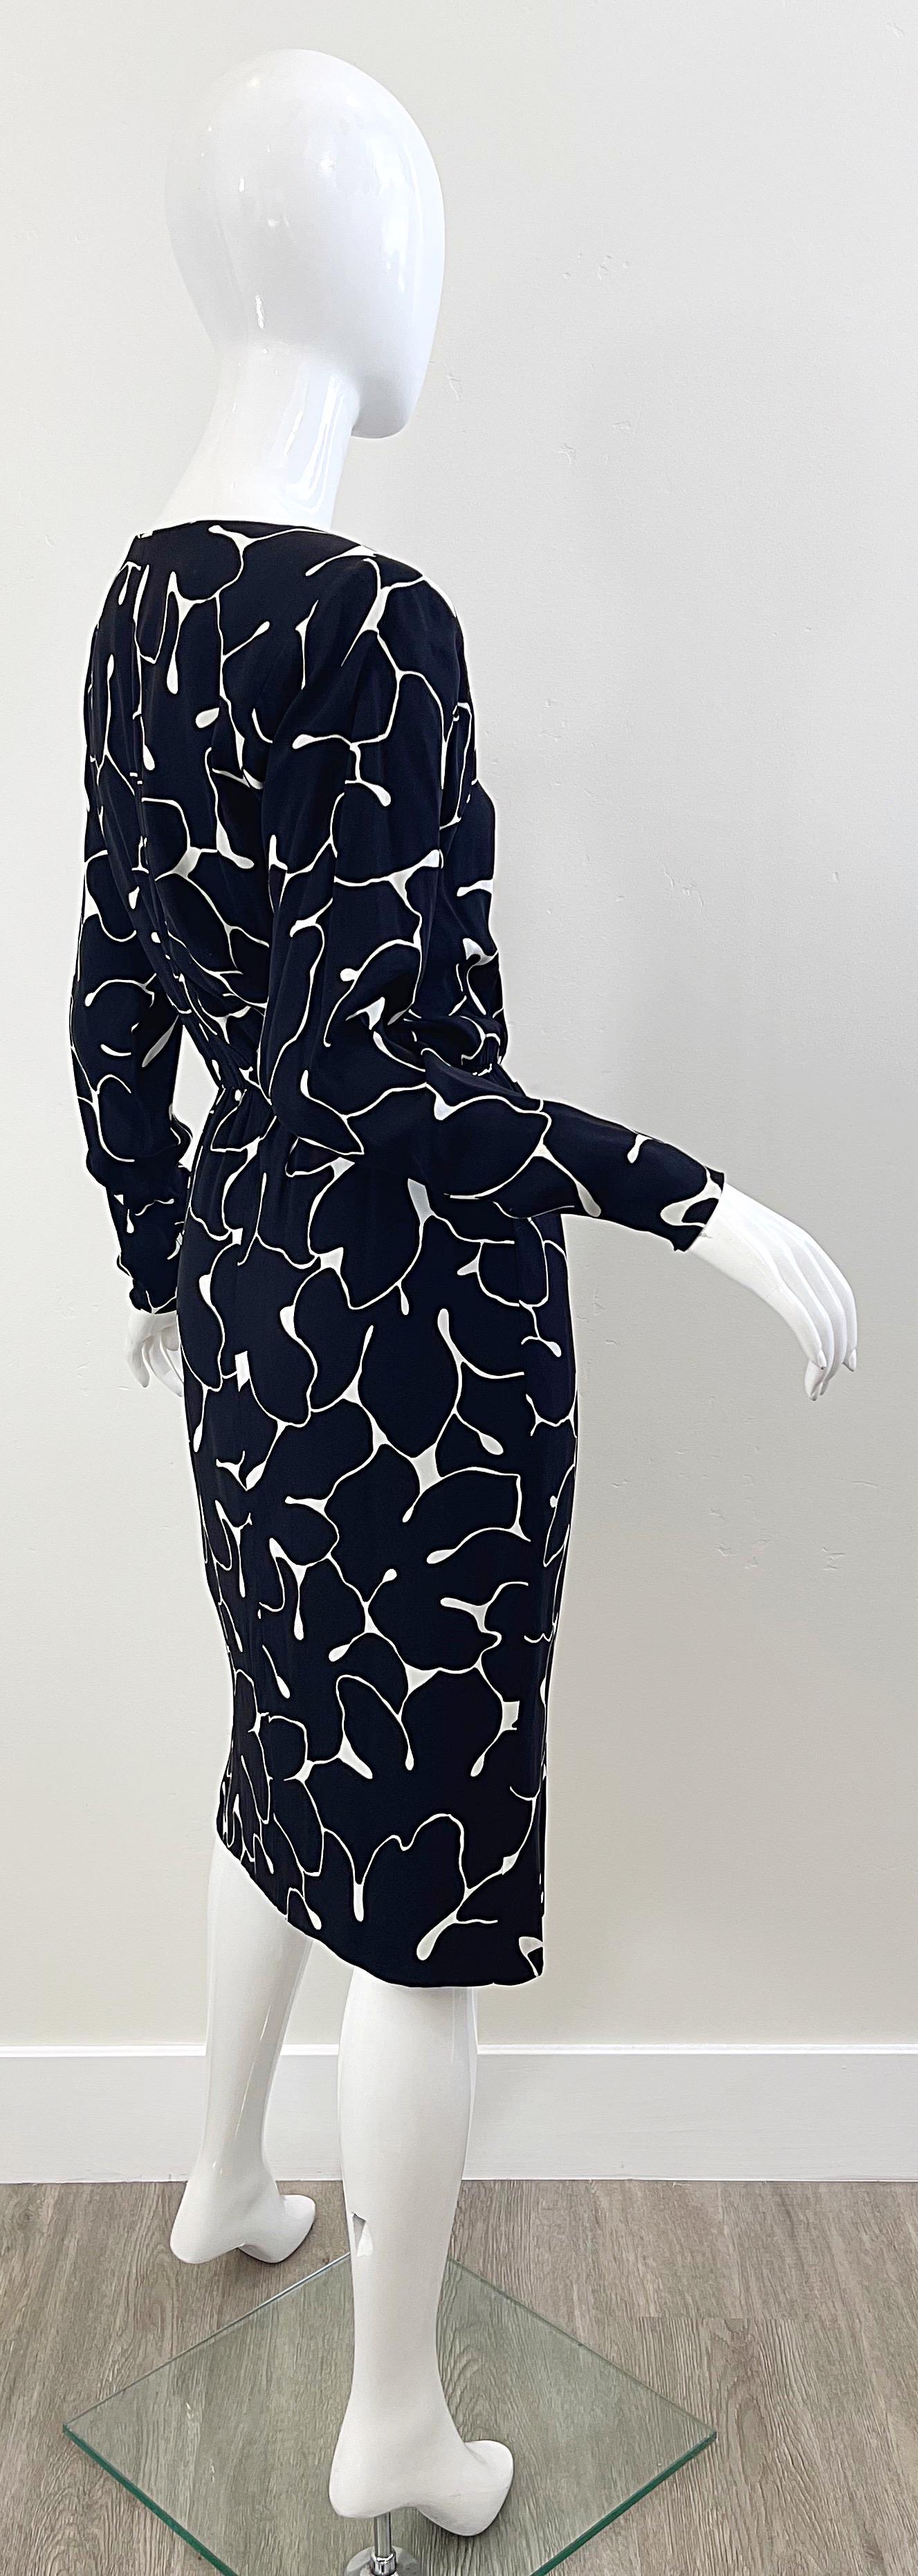 Yves Saint Laurent 1980s Black and White Abstract Flower Print Silk Crepe Dress For Sale 10